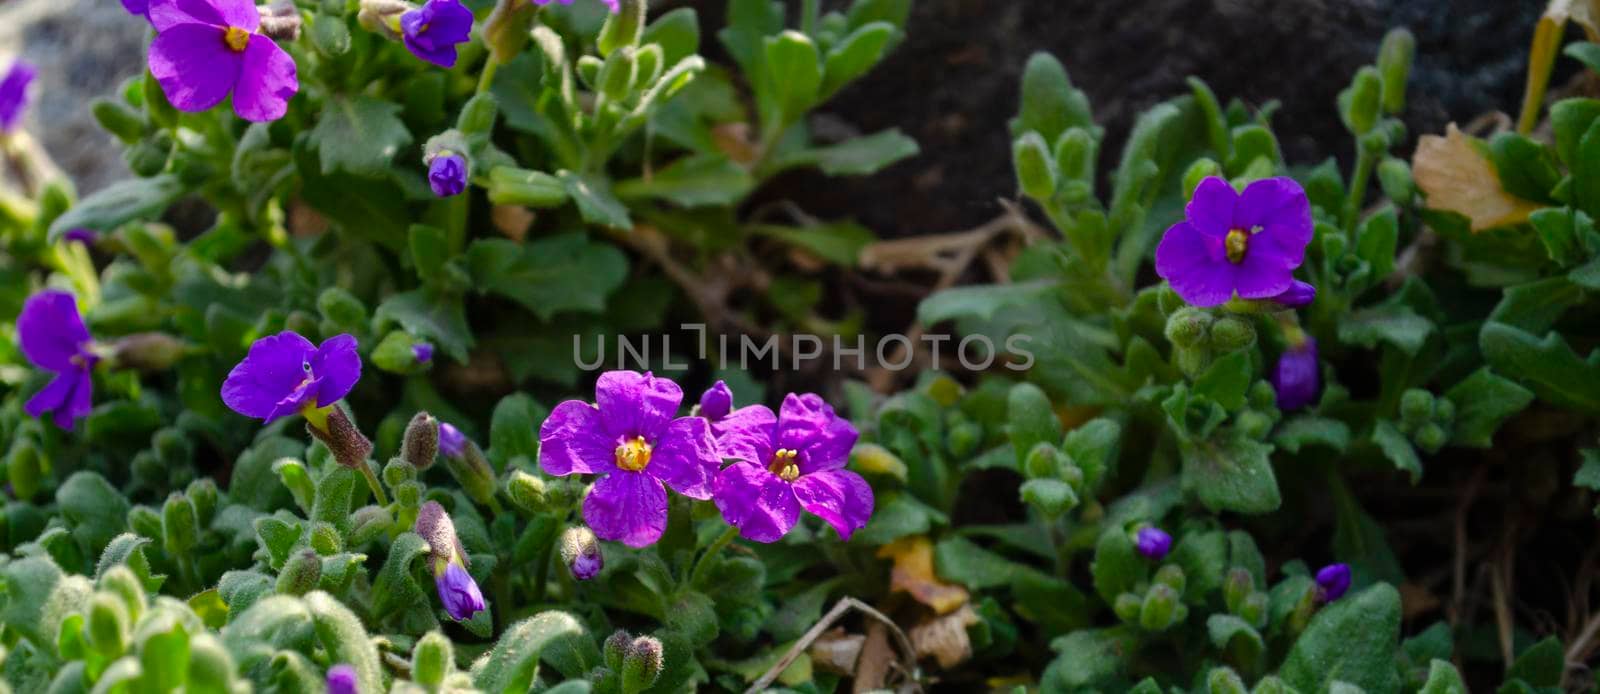 Spring nature common violets background. Viola Odorata flowers in the garden .Glade with purple flowers of violets close up by mtx